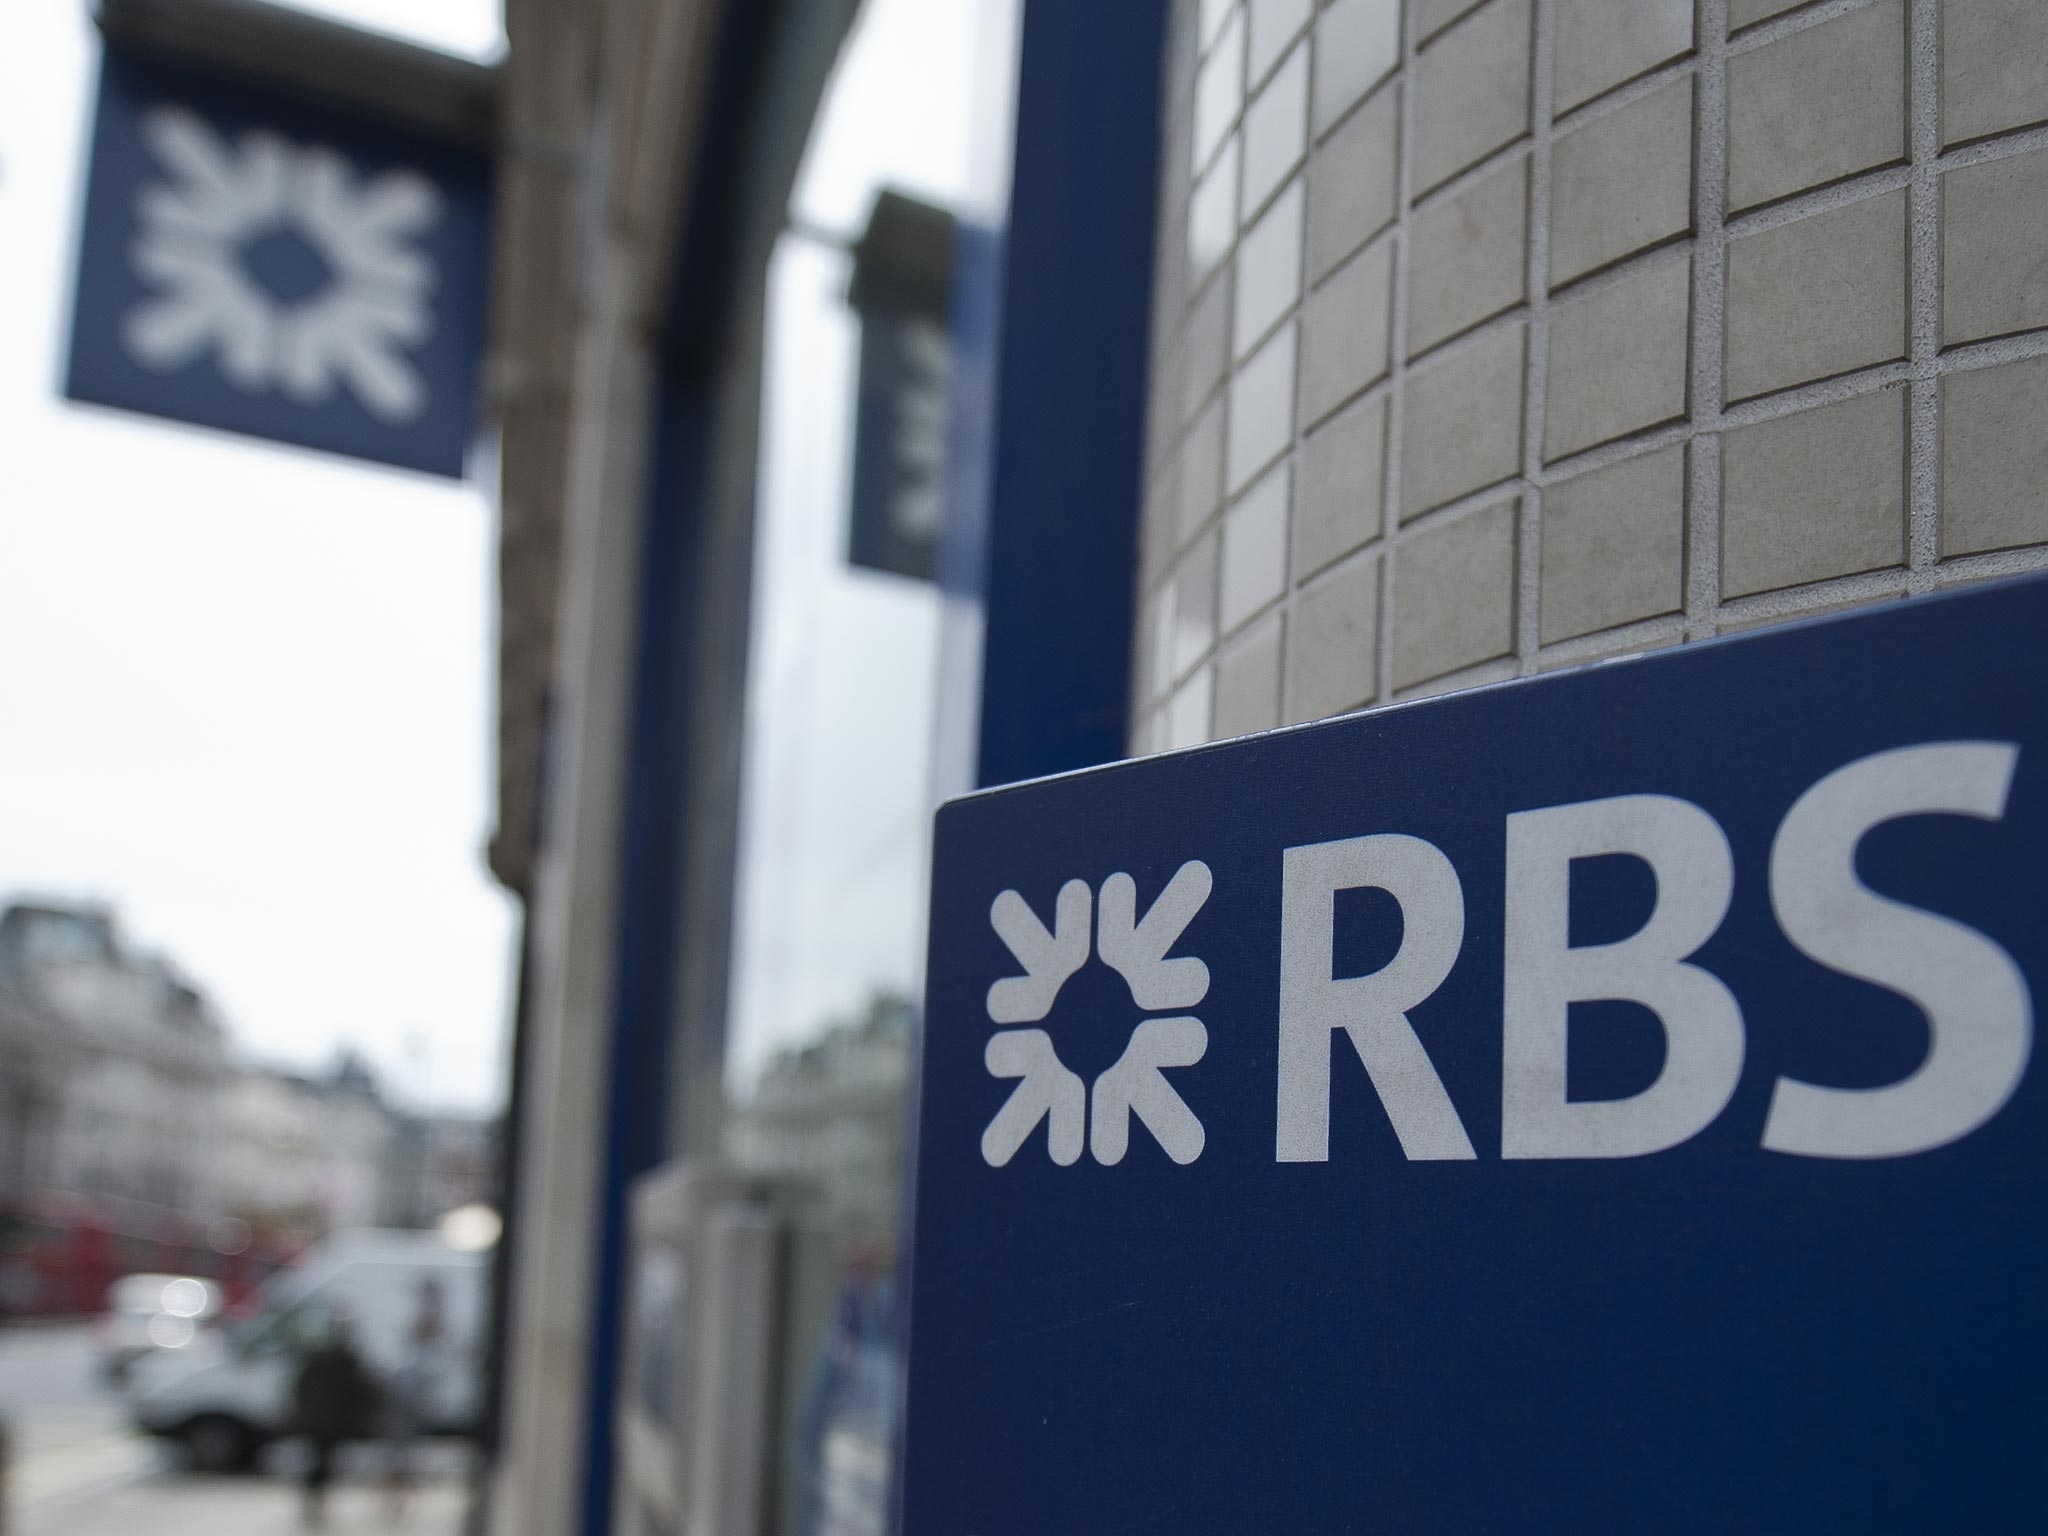 RBS needs to reconnect with its customers if it wants to grow